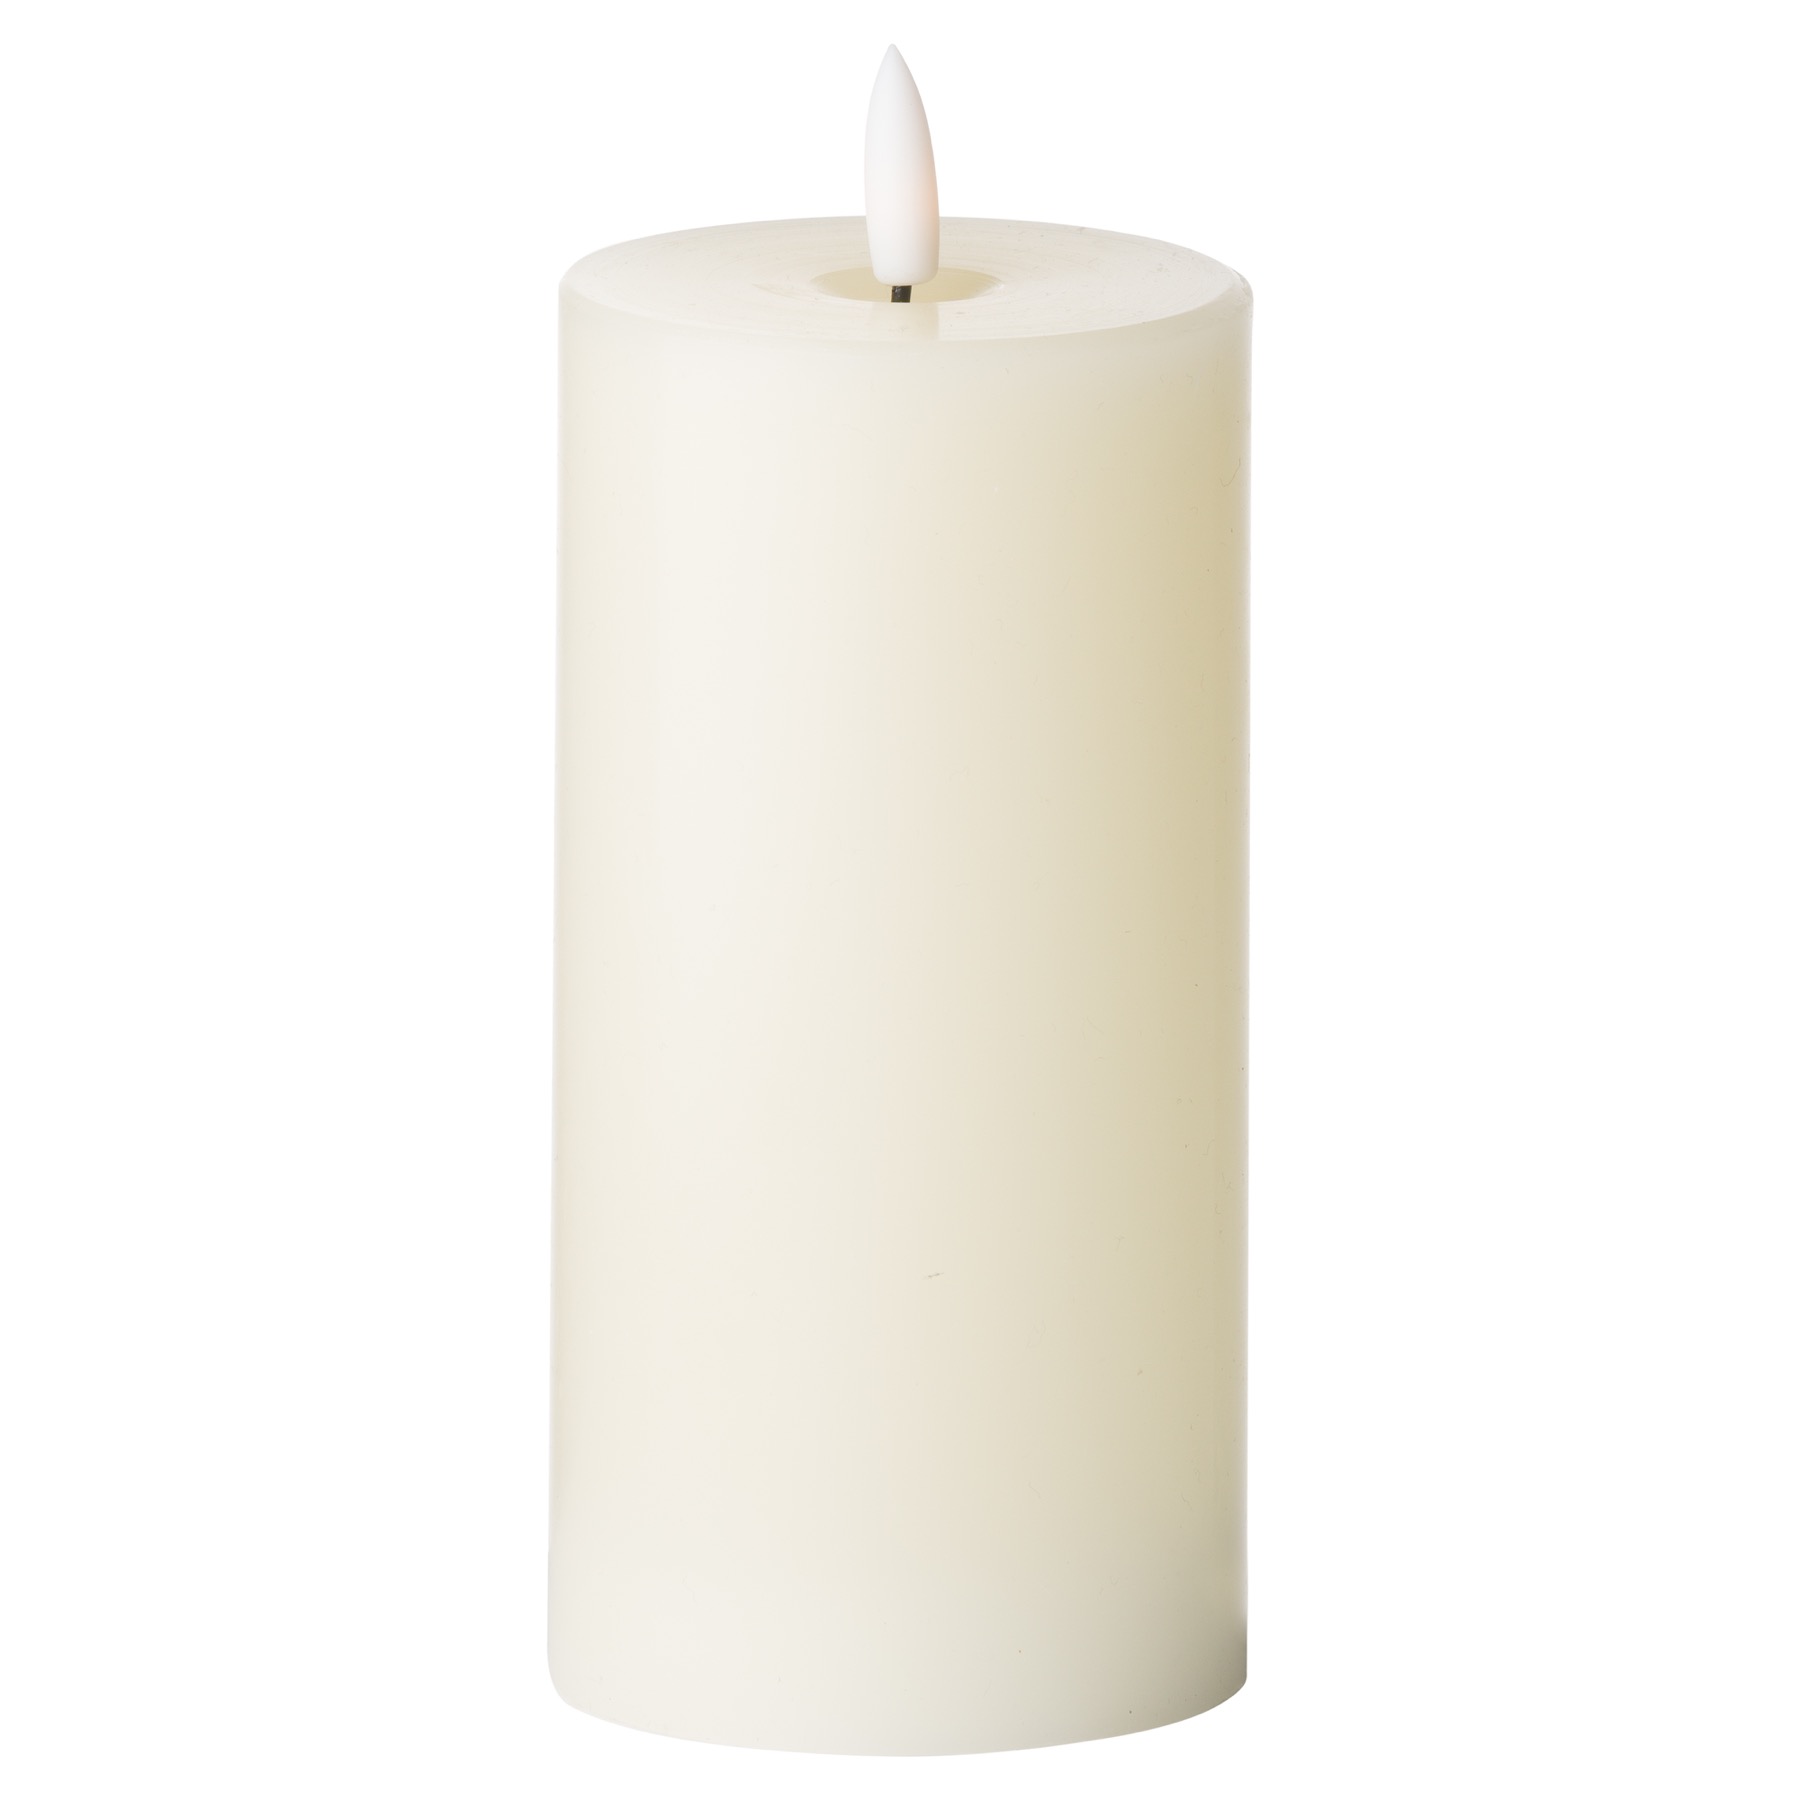 Luxe Collection Natural Glow 3 x 6 LED Ivory Candle - Image 1